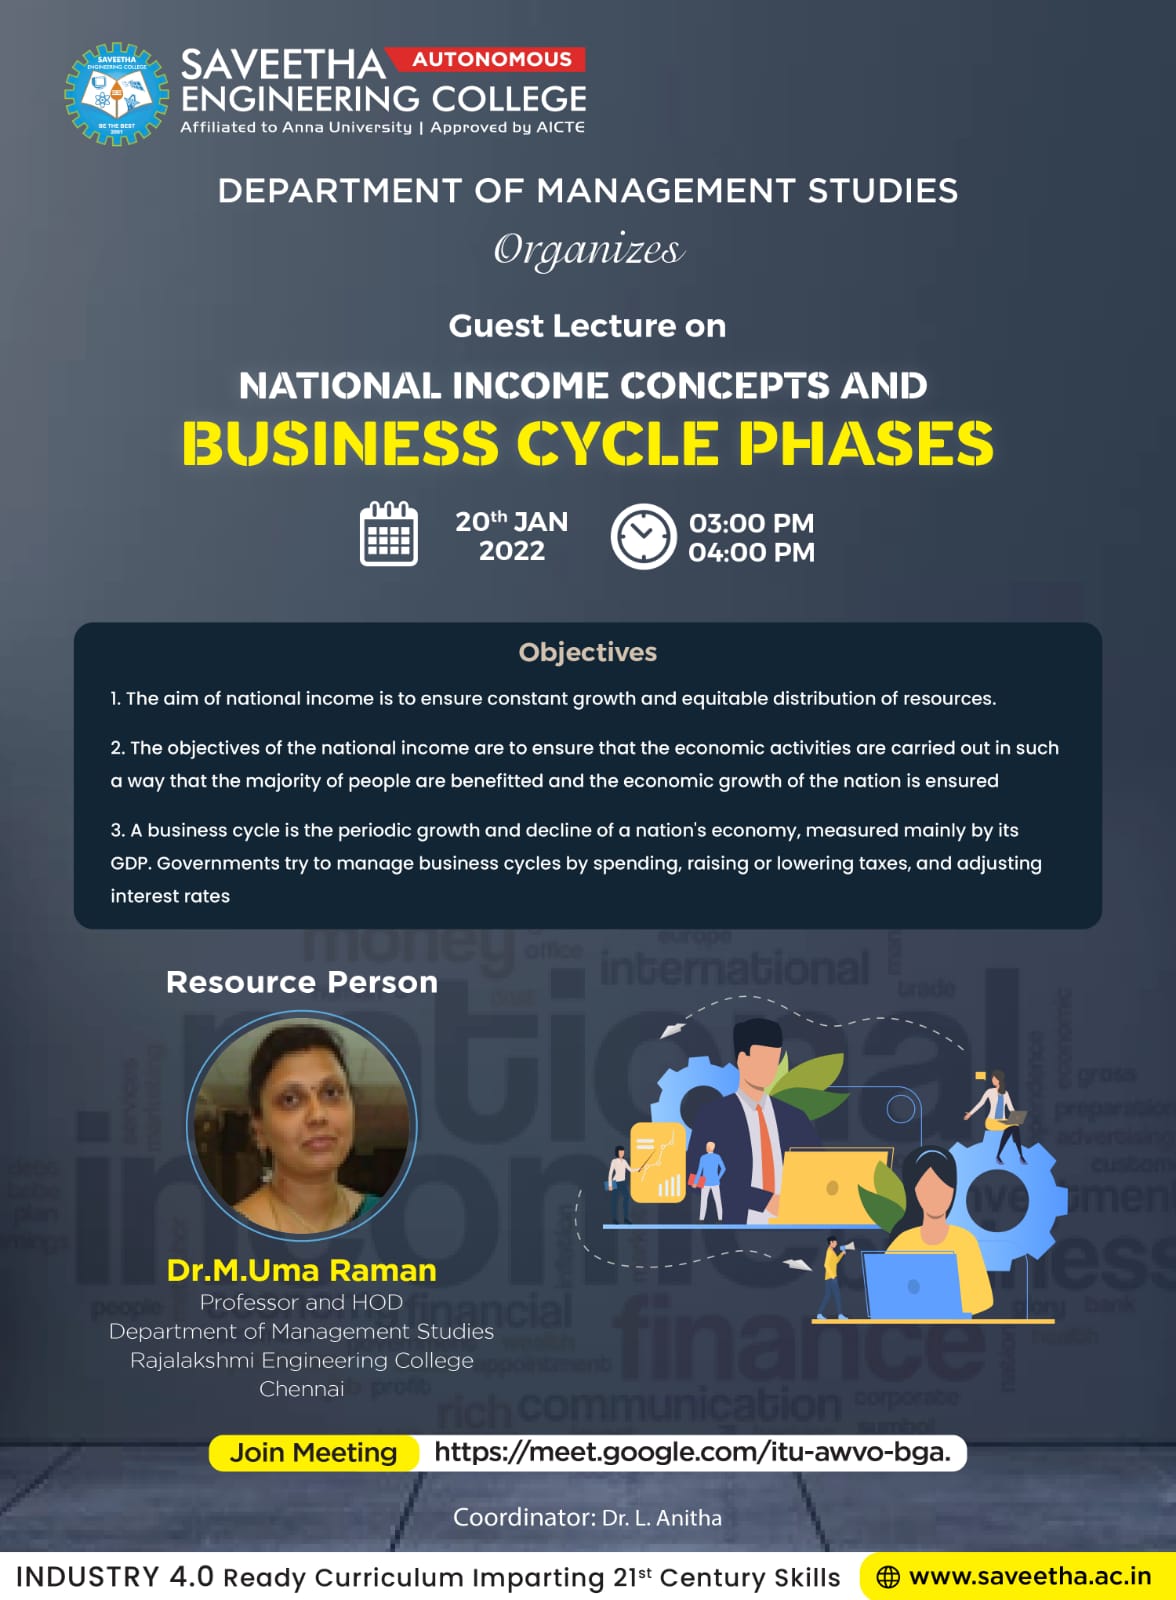 National Income Concepts Business Cycle Phases Guest Lecture at Saveetha Engineering College